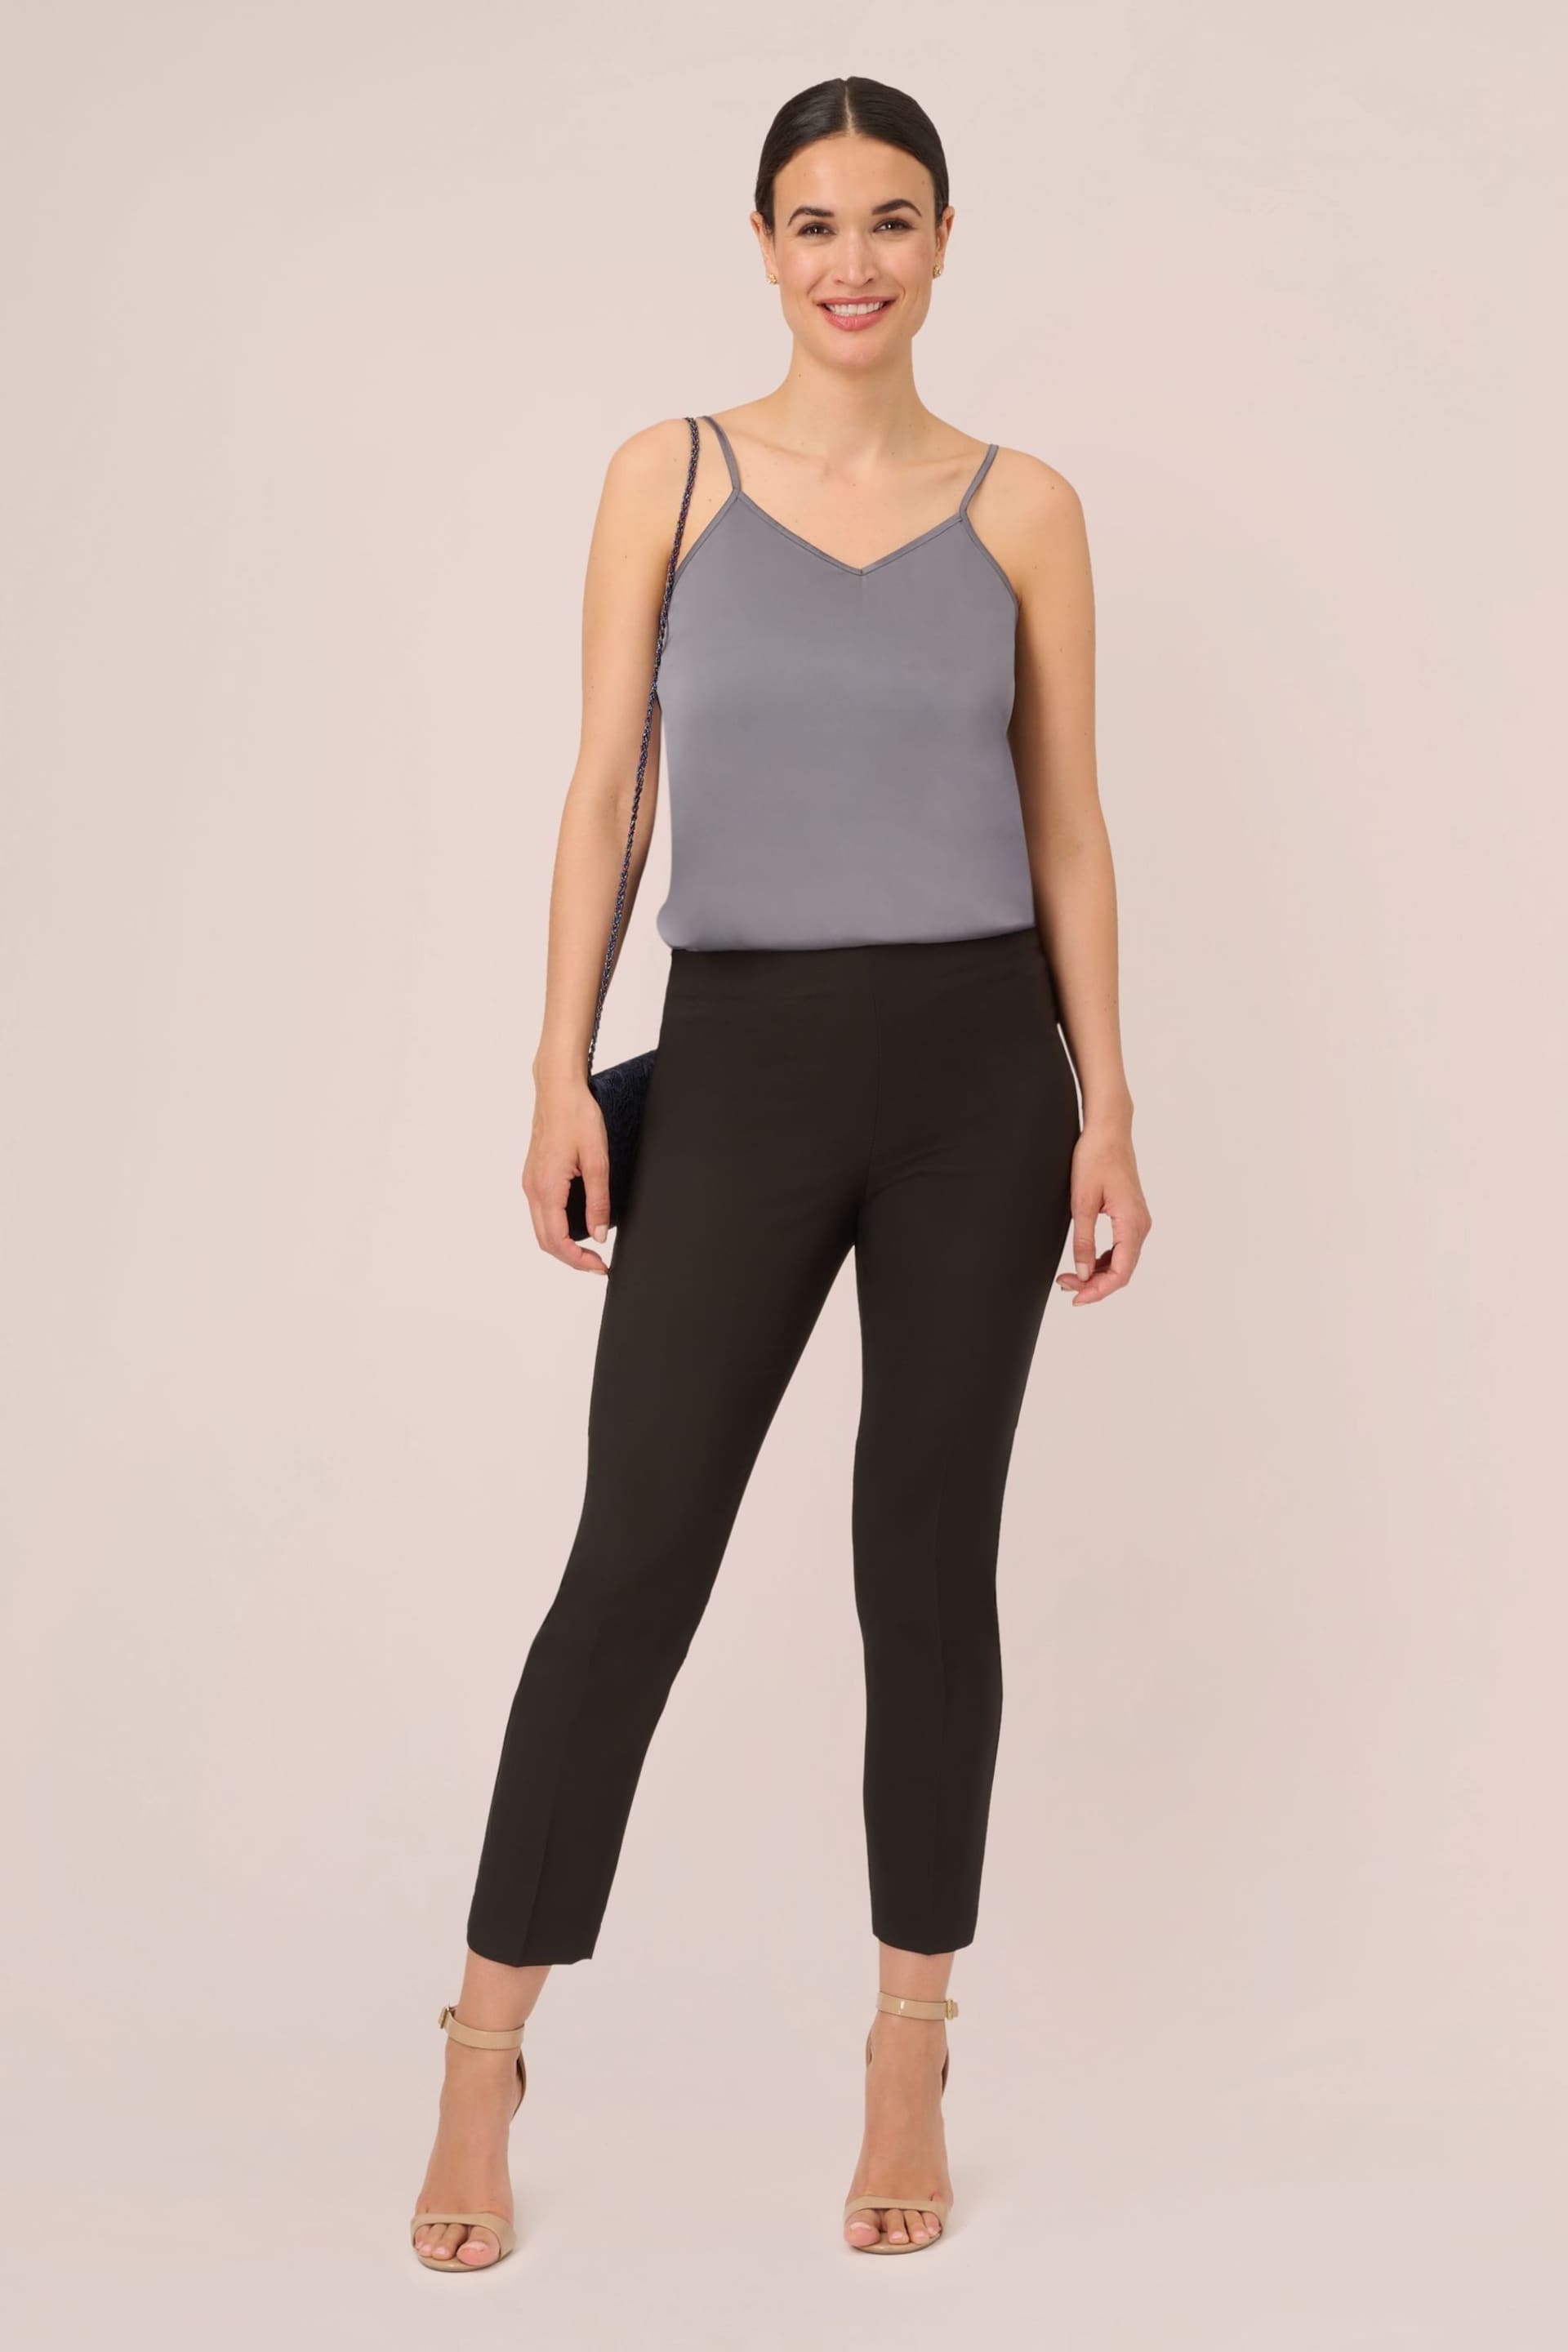 Adrianna Papell Solid Bi-Stretch Pull-On Black Trousers - Image 3 of 6